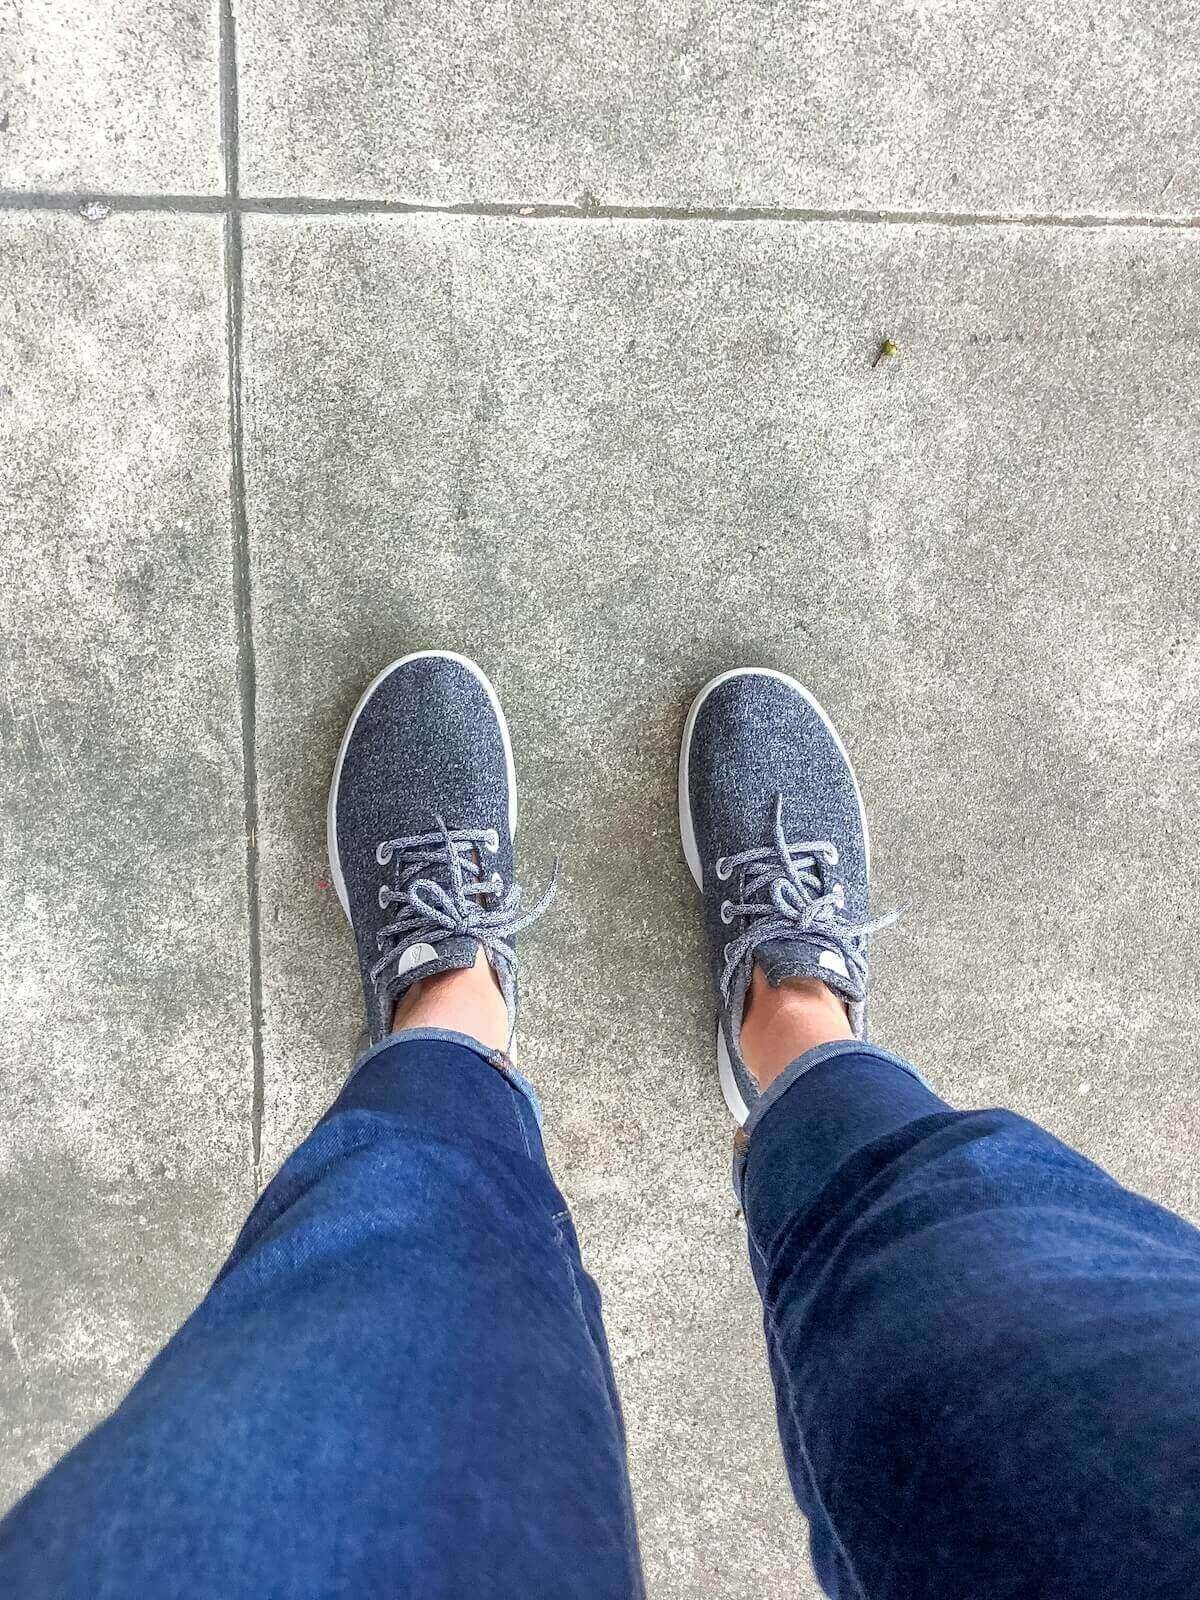 A view looking down at a pair of feet wearing a pair of grey Allbirds Wool Runners.